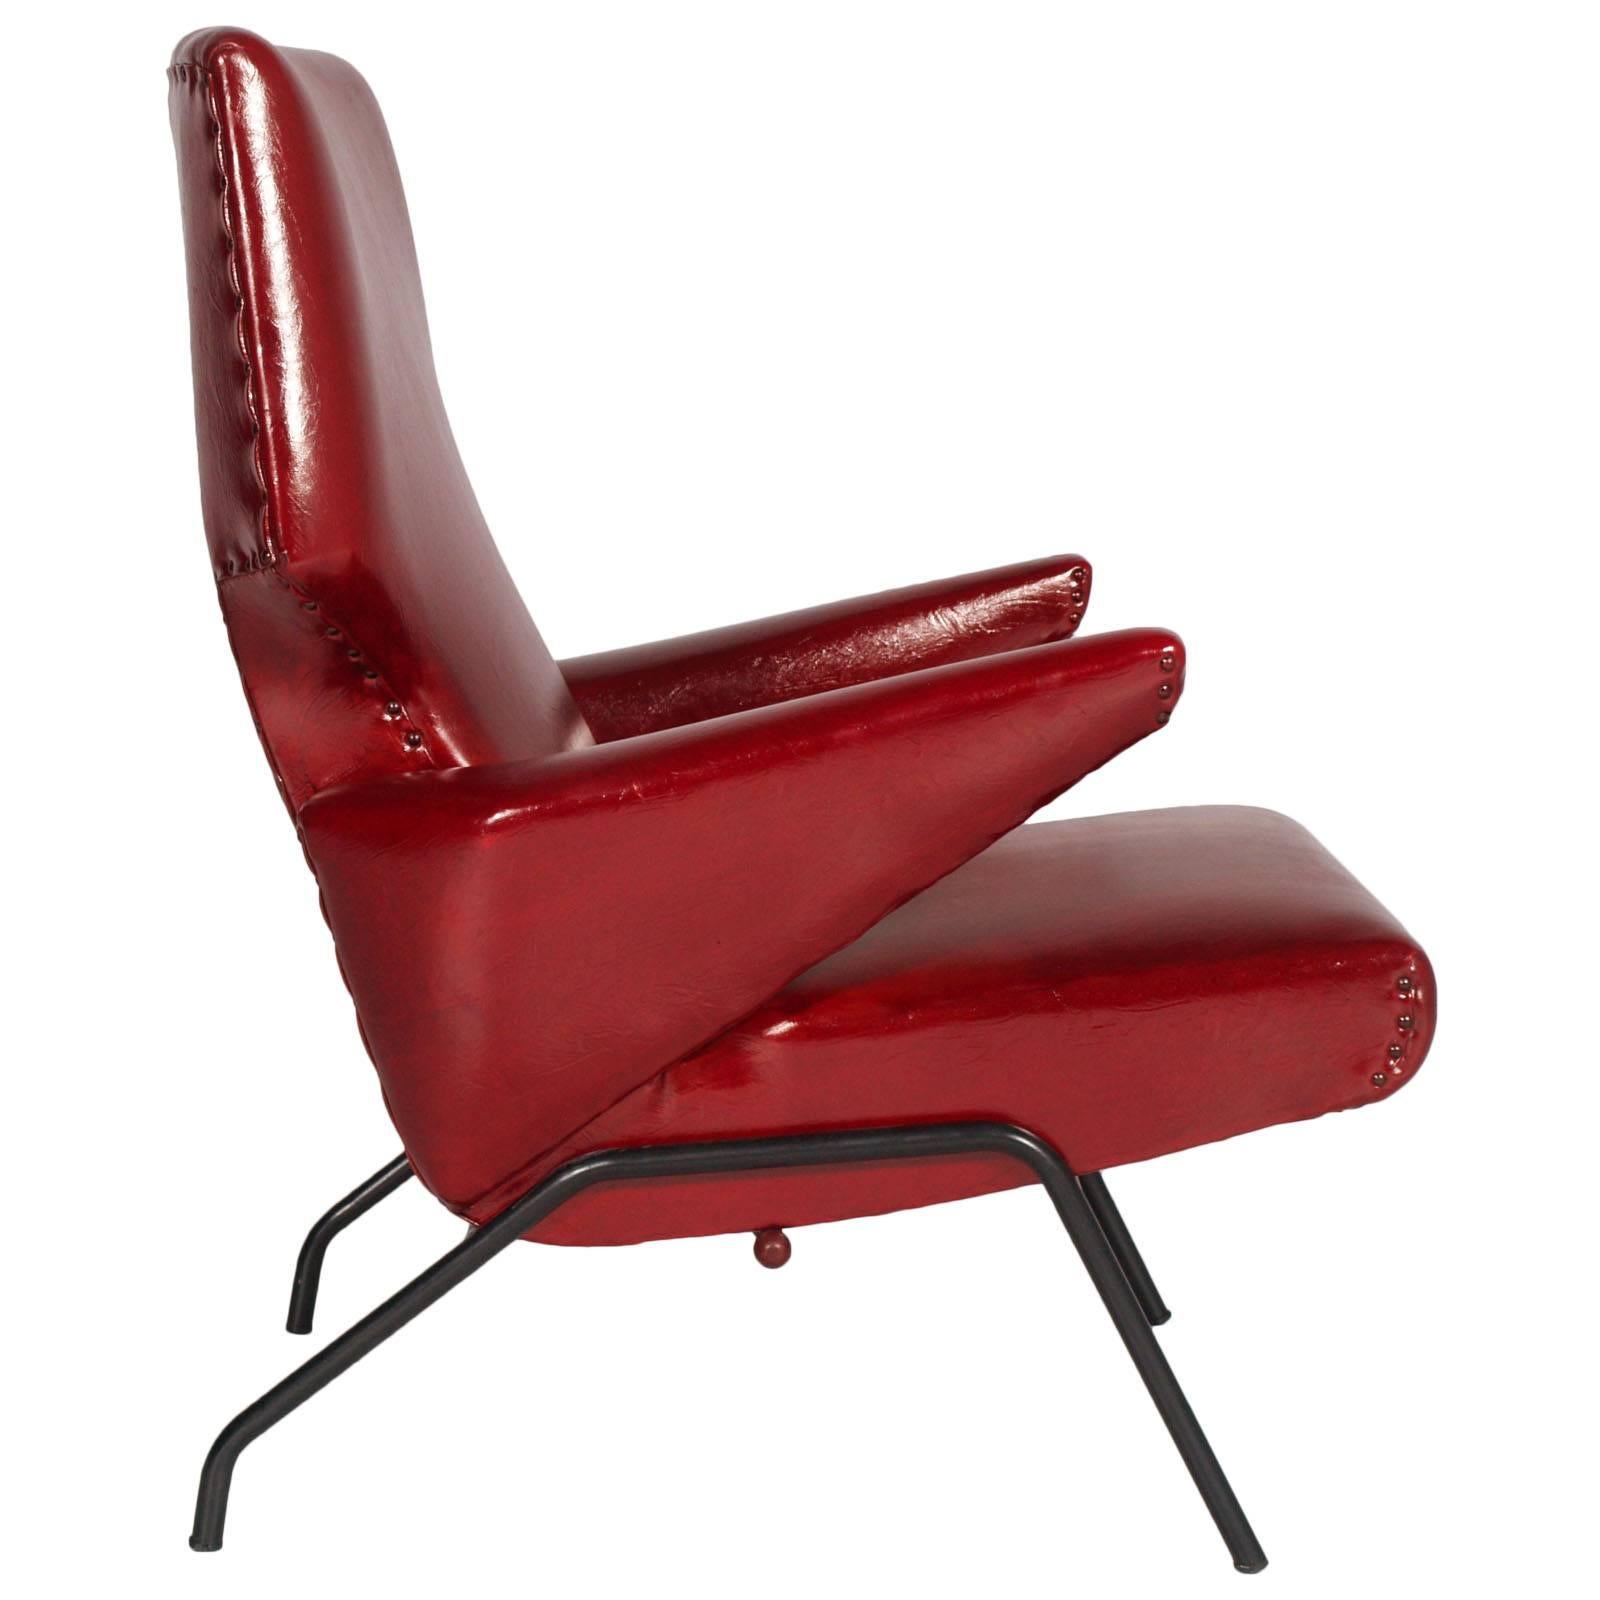 Italy Lounge club chair or Armchair , Mid-Century Modern Svend Skipper reclining adjustable.
Vintage wingback armchair in the manner of Svend Skipper in leatherette.
With black iron legs, with backrest angle adjustment system. Very comfortable and